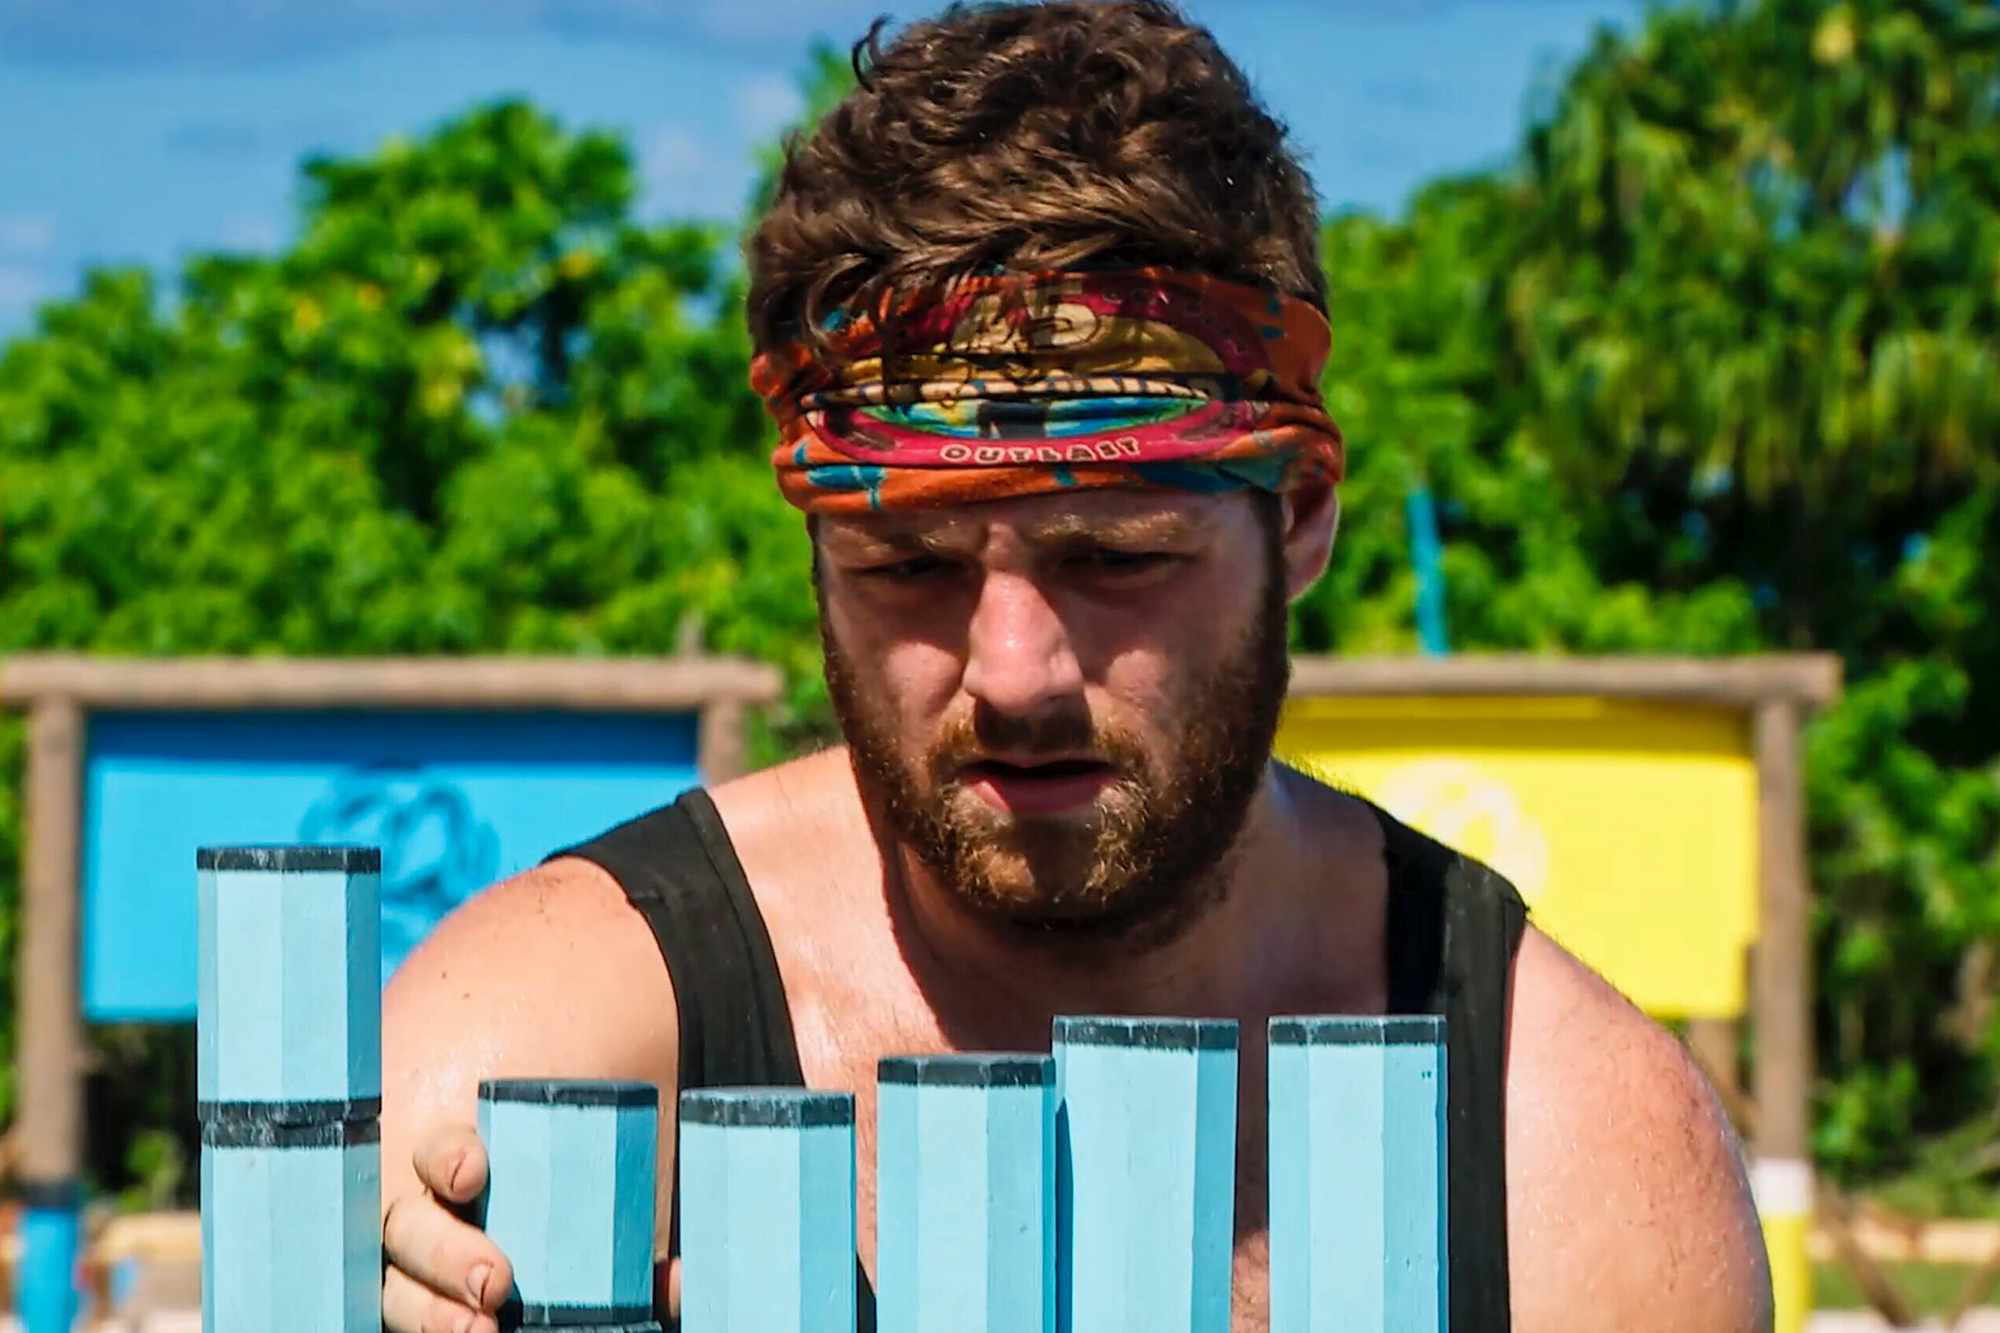 “Survivor 45” star Jake O'Kane reacts to being disqualified from final